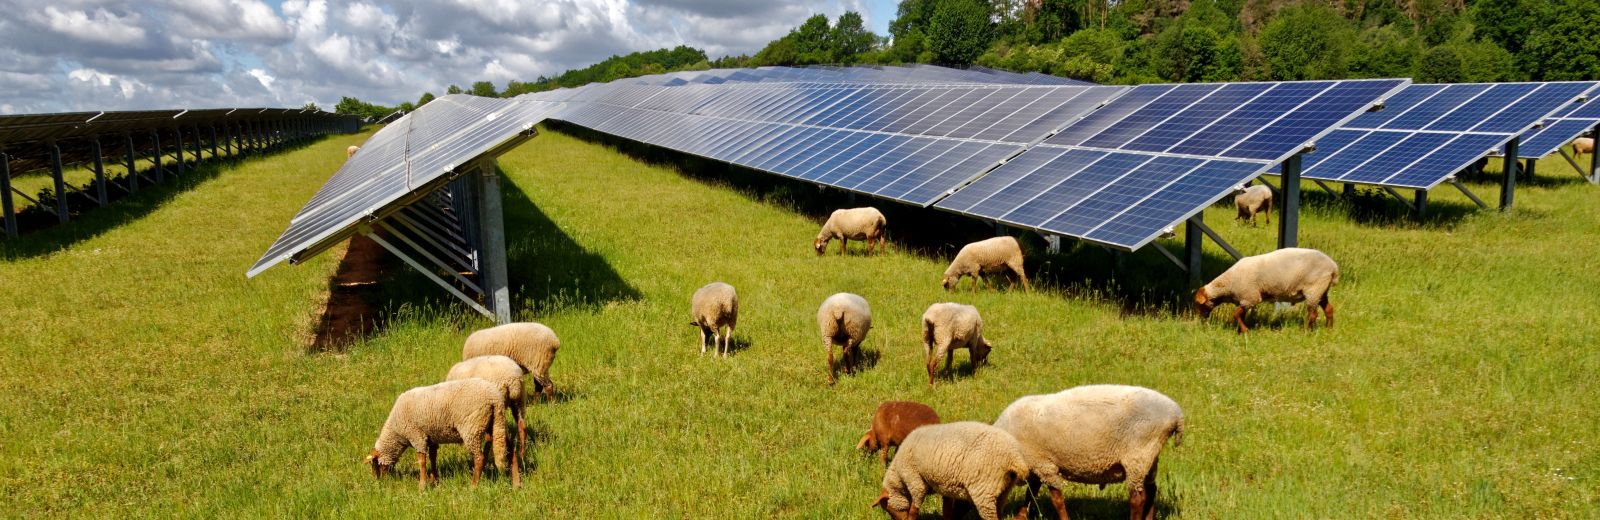 Sustainable agriculture header image with sheep